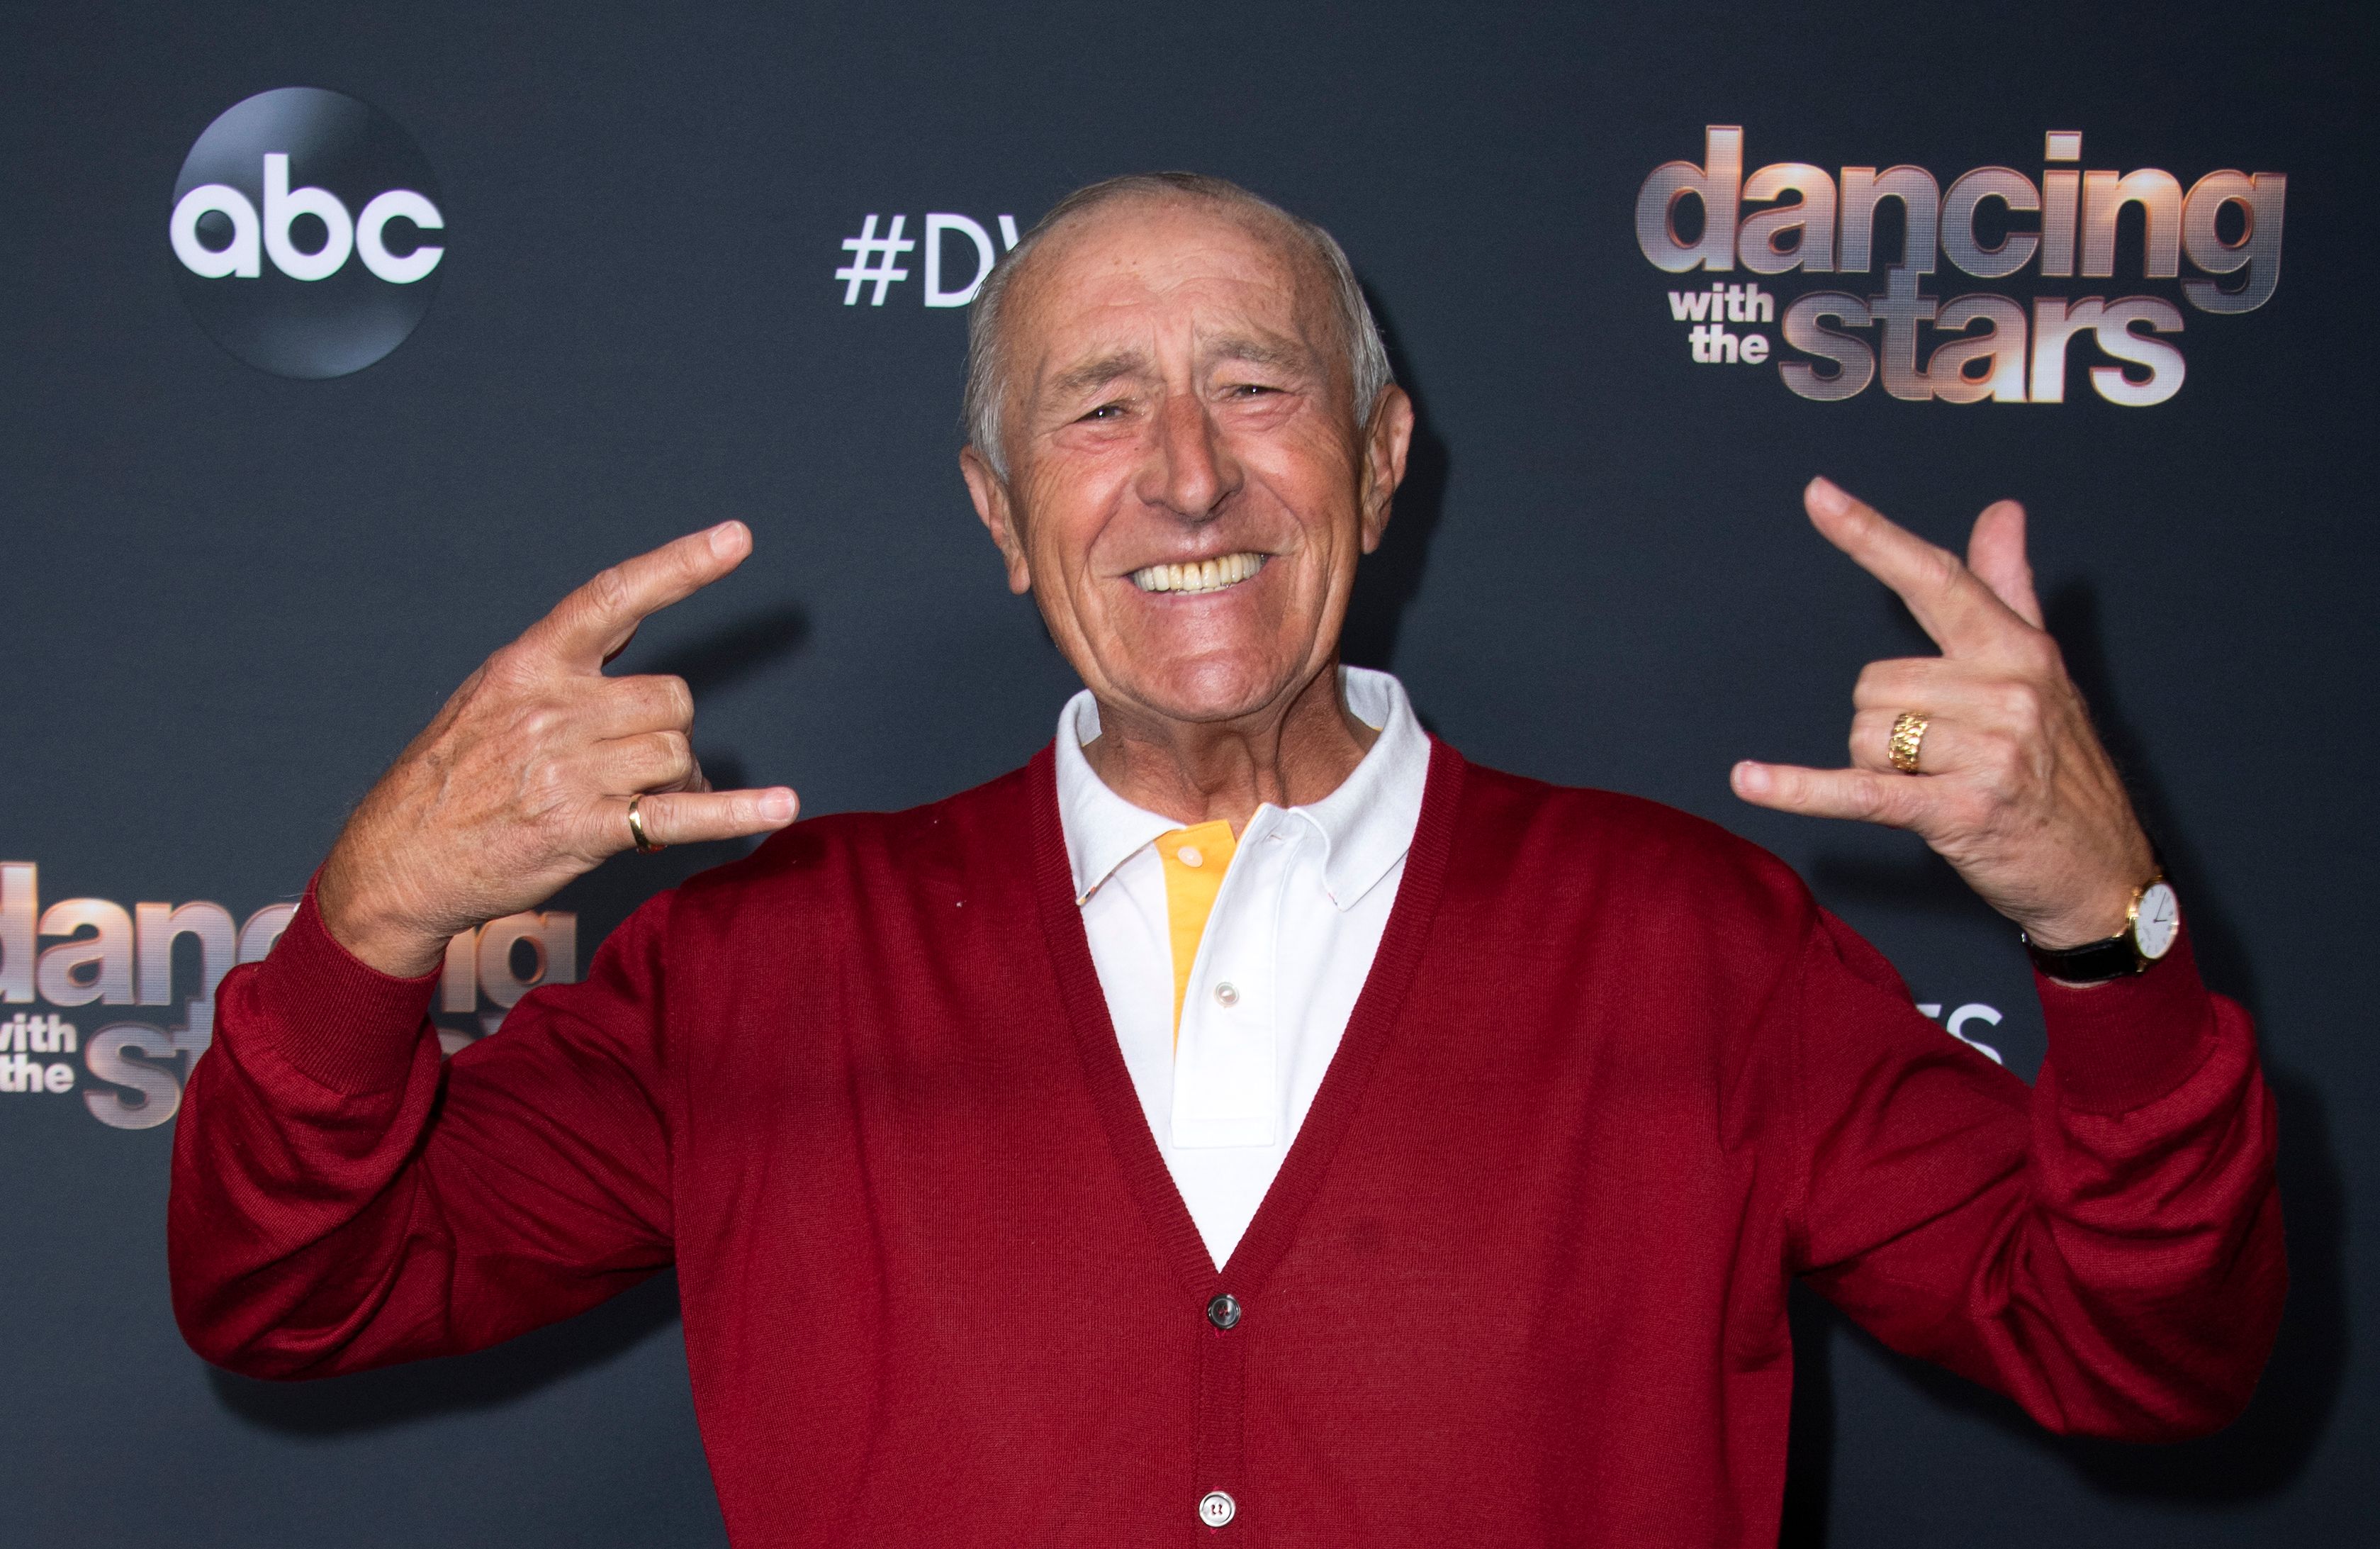 Len Goodman on November 4, 2019, in Los Angeles. | Source: Getty Images